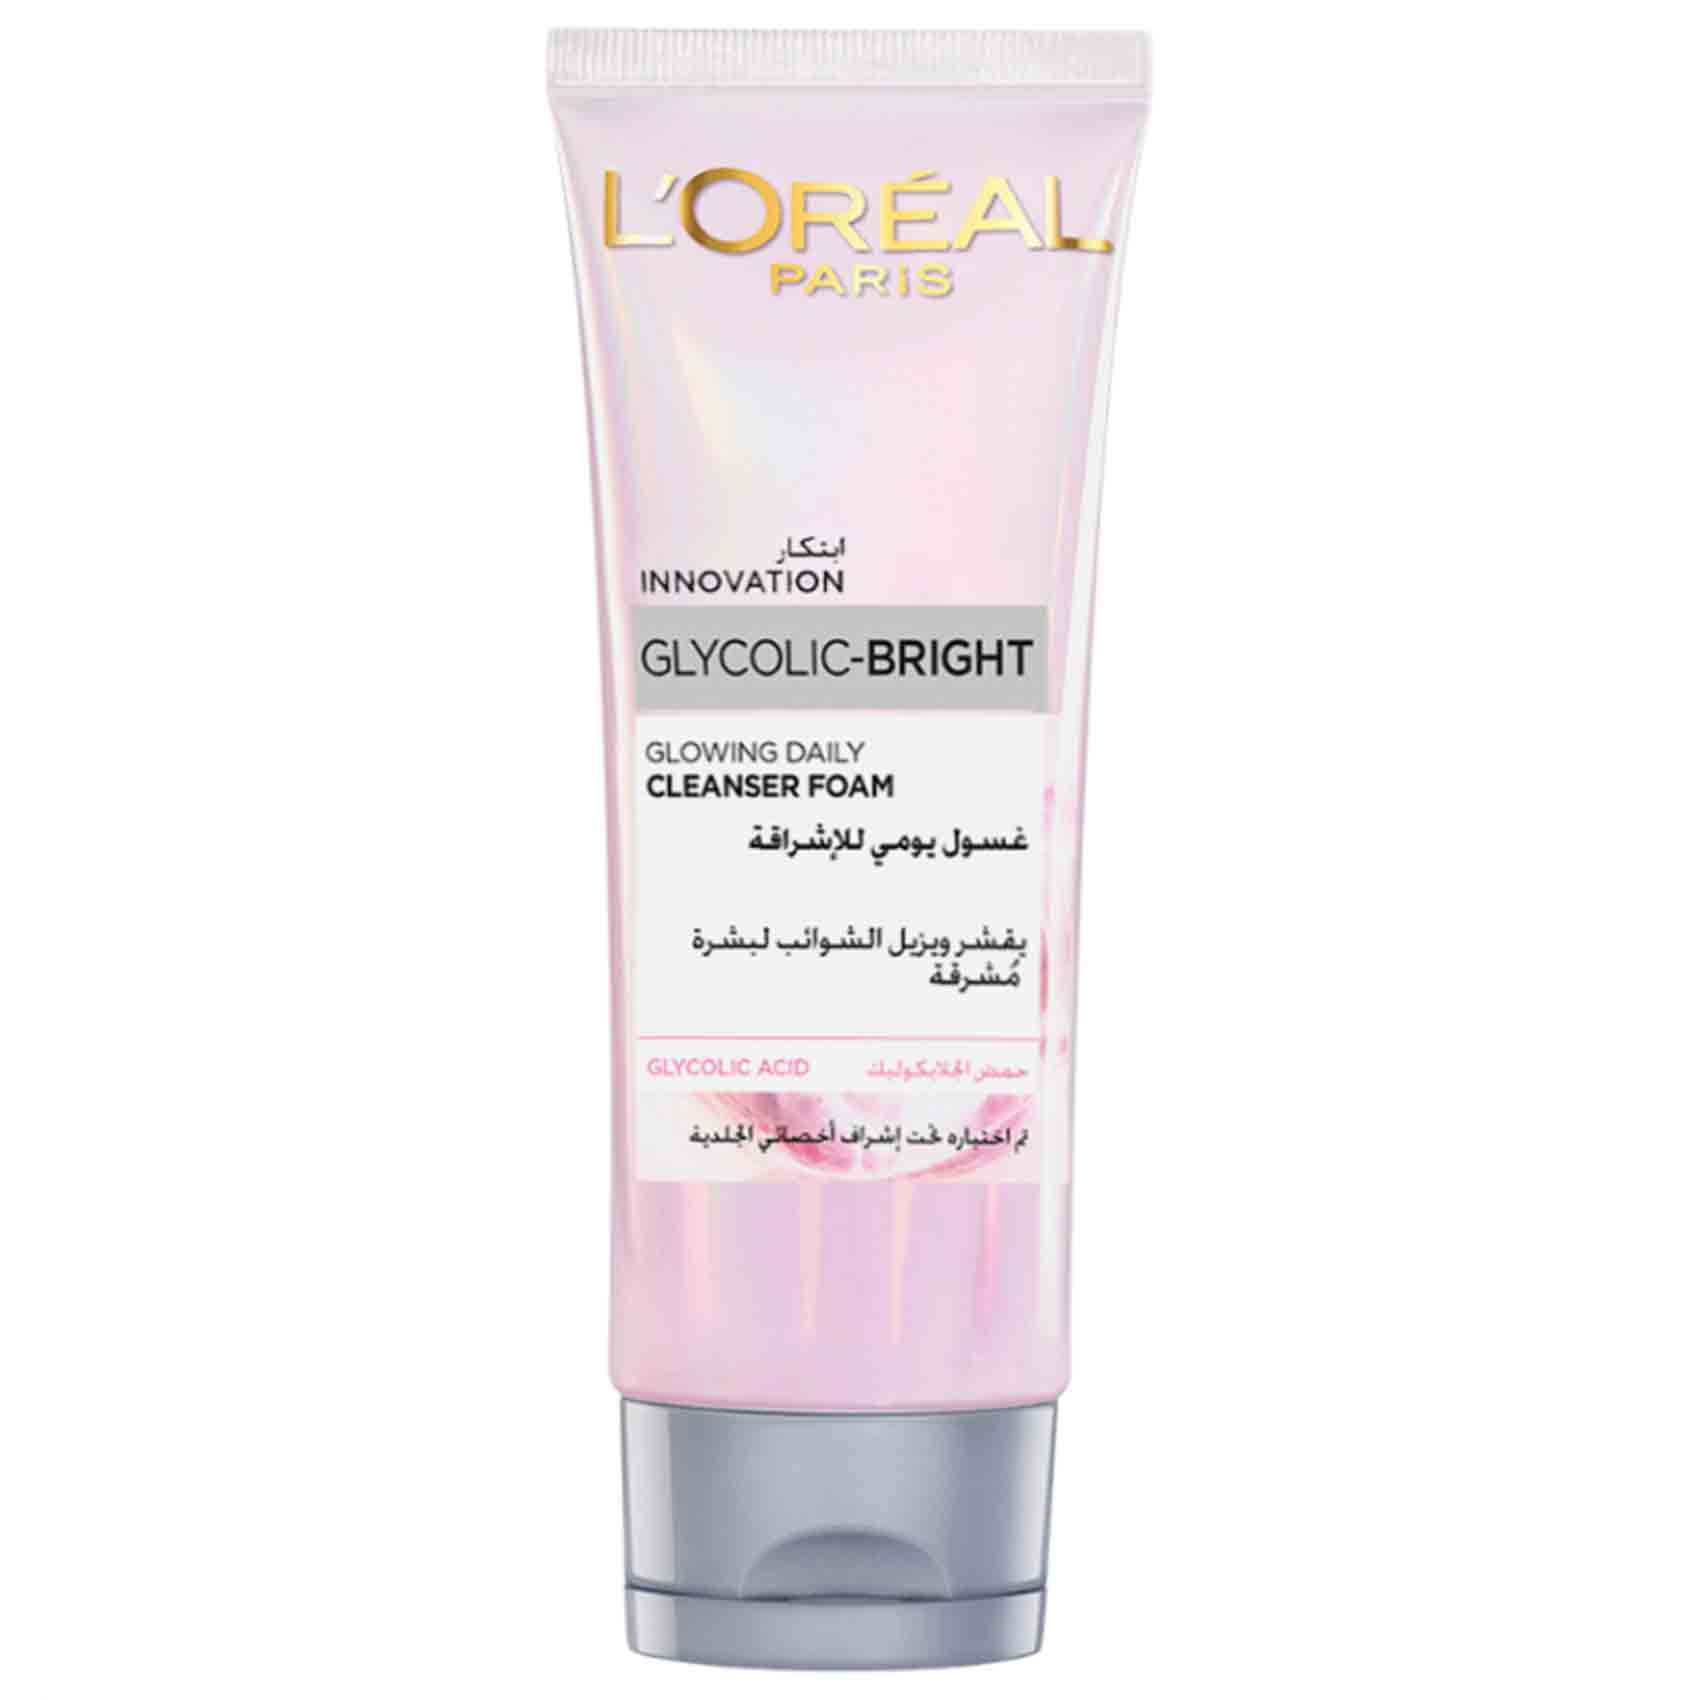 L&#39;Oreal Paris Glycolic Bright Innovation Glowing Daily Cleanser Foam 100 Ml